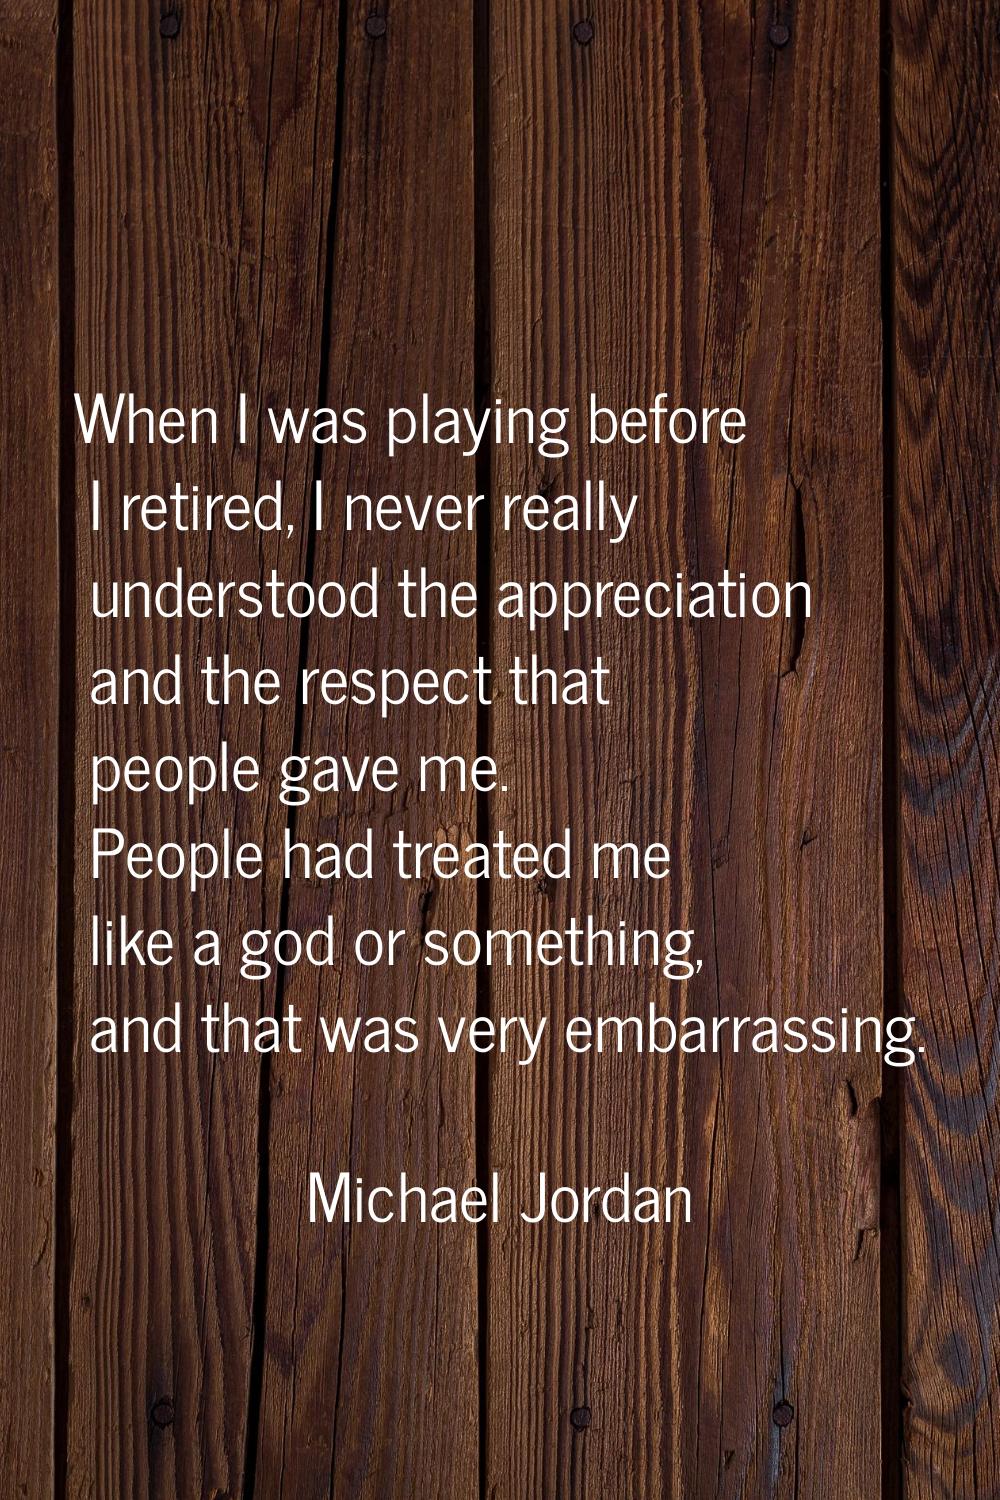 When I was playing before I retired, I never really understood the appreciation and the respect tha